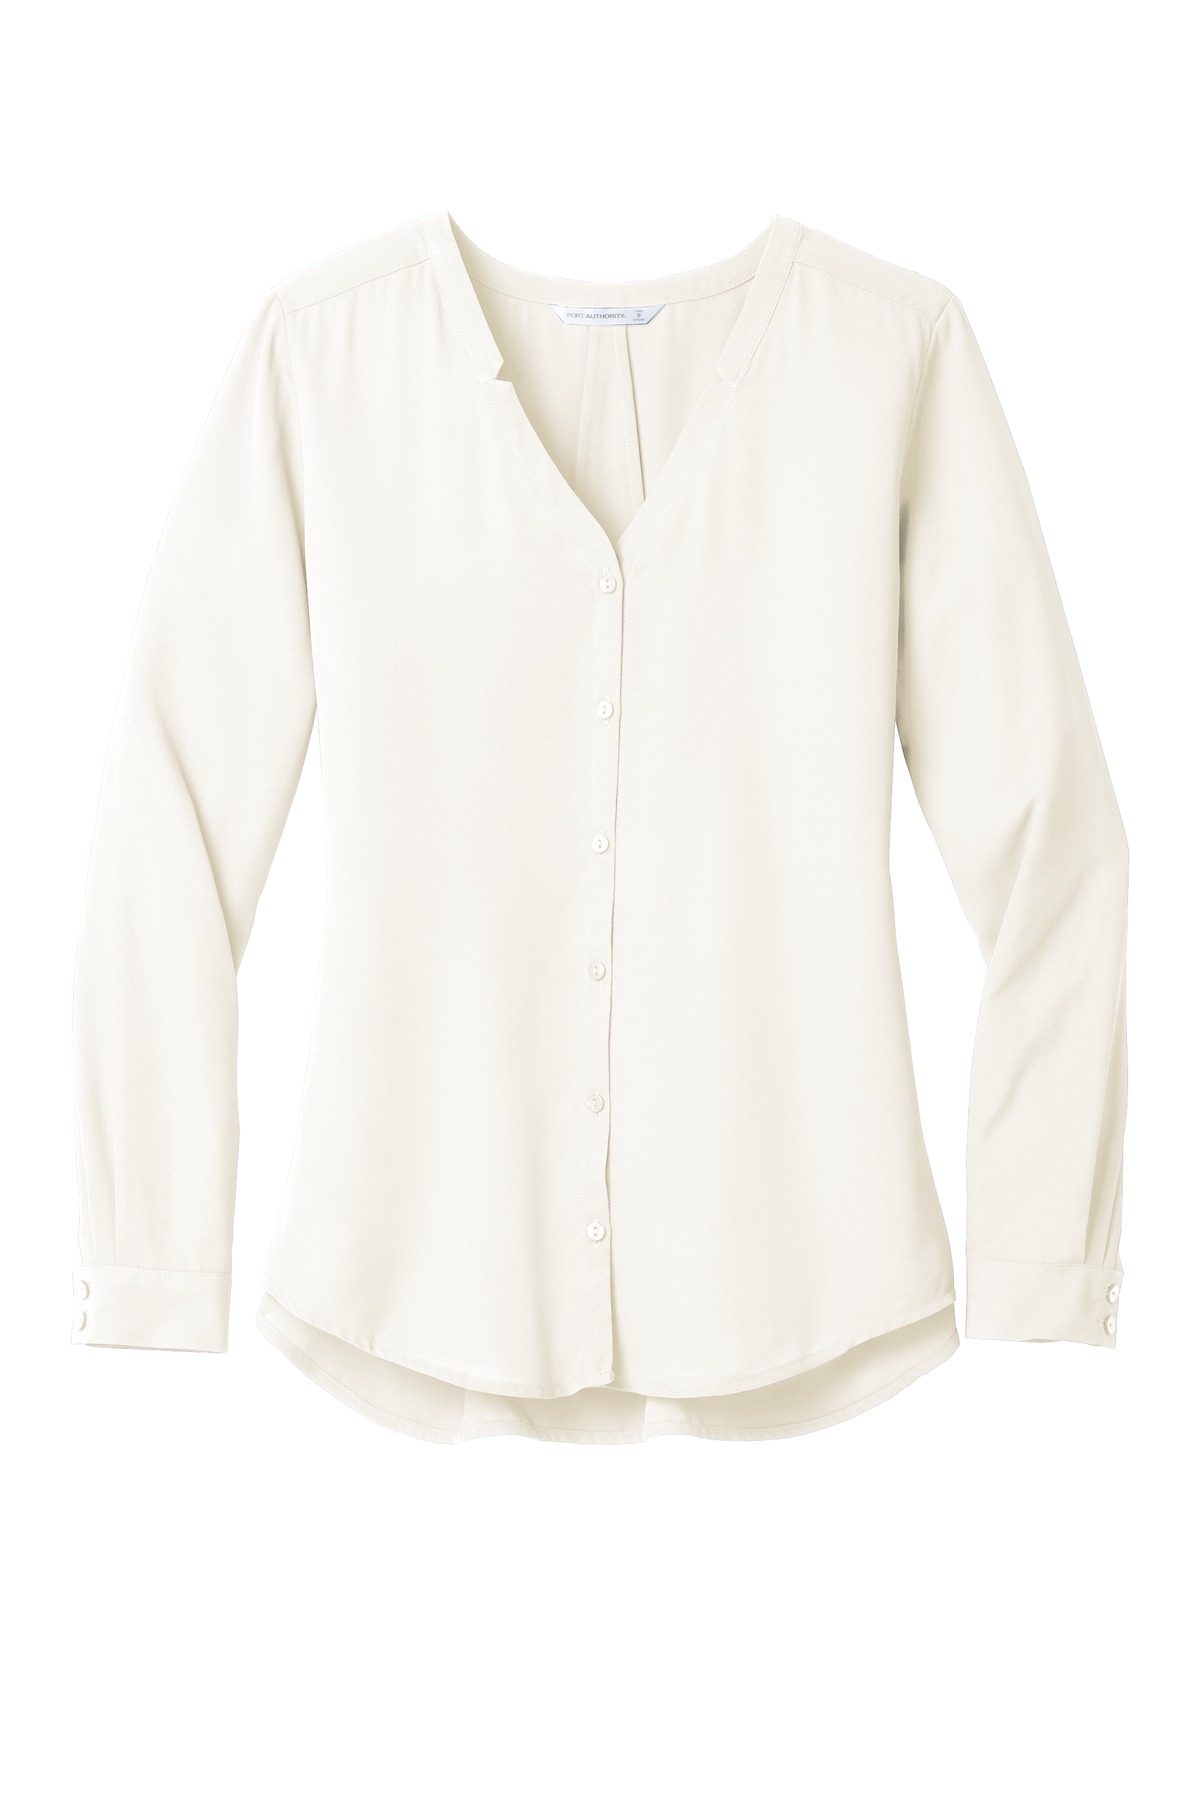 Port Authority Women's Long Sleeve Button-Front Blouse. LW700 - image 3 of 4